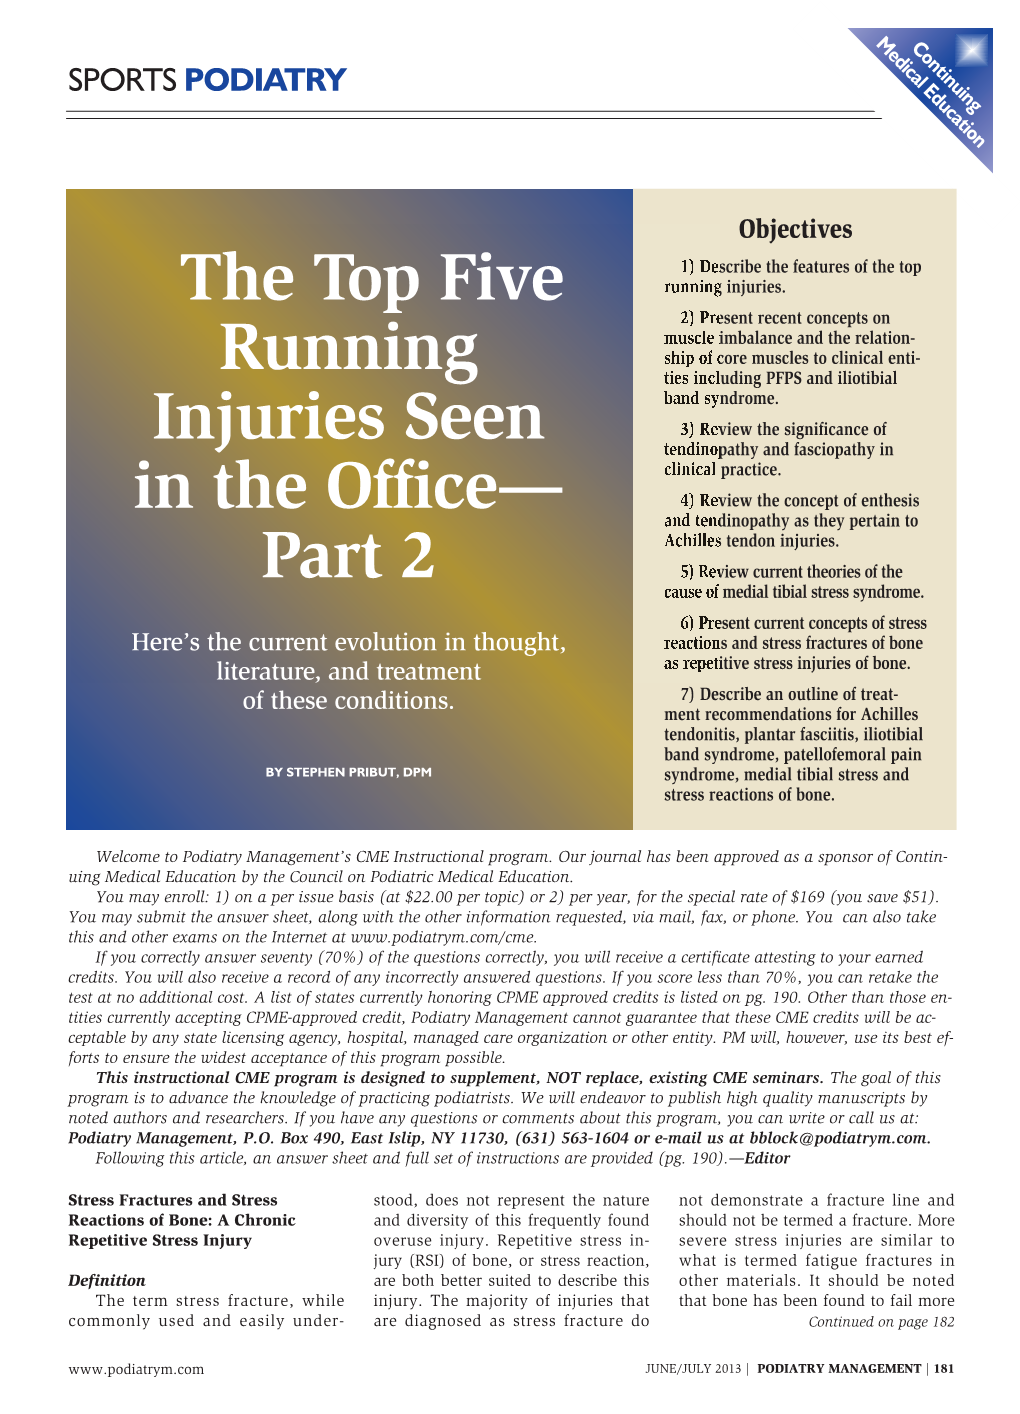 The Top Five Running Injuries Seen in the Office— Part 2